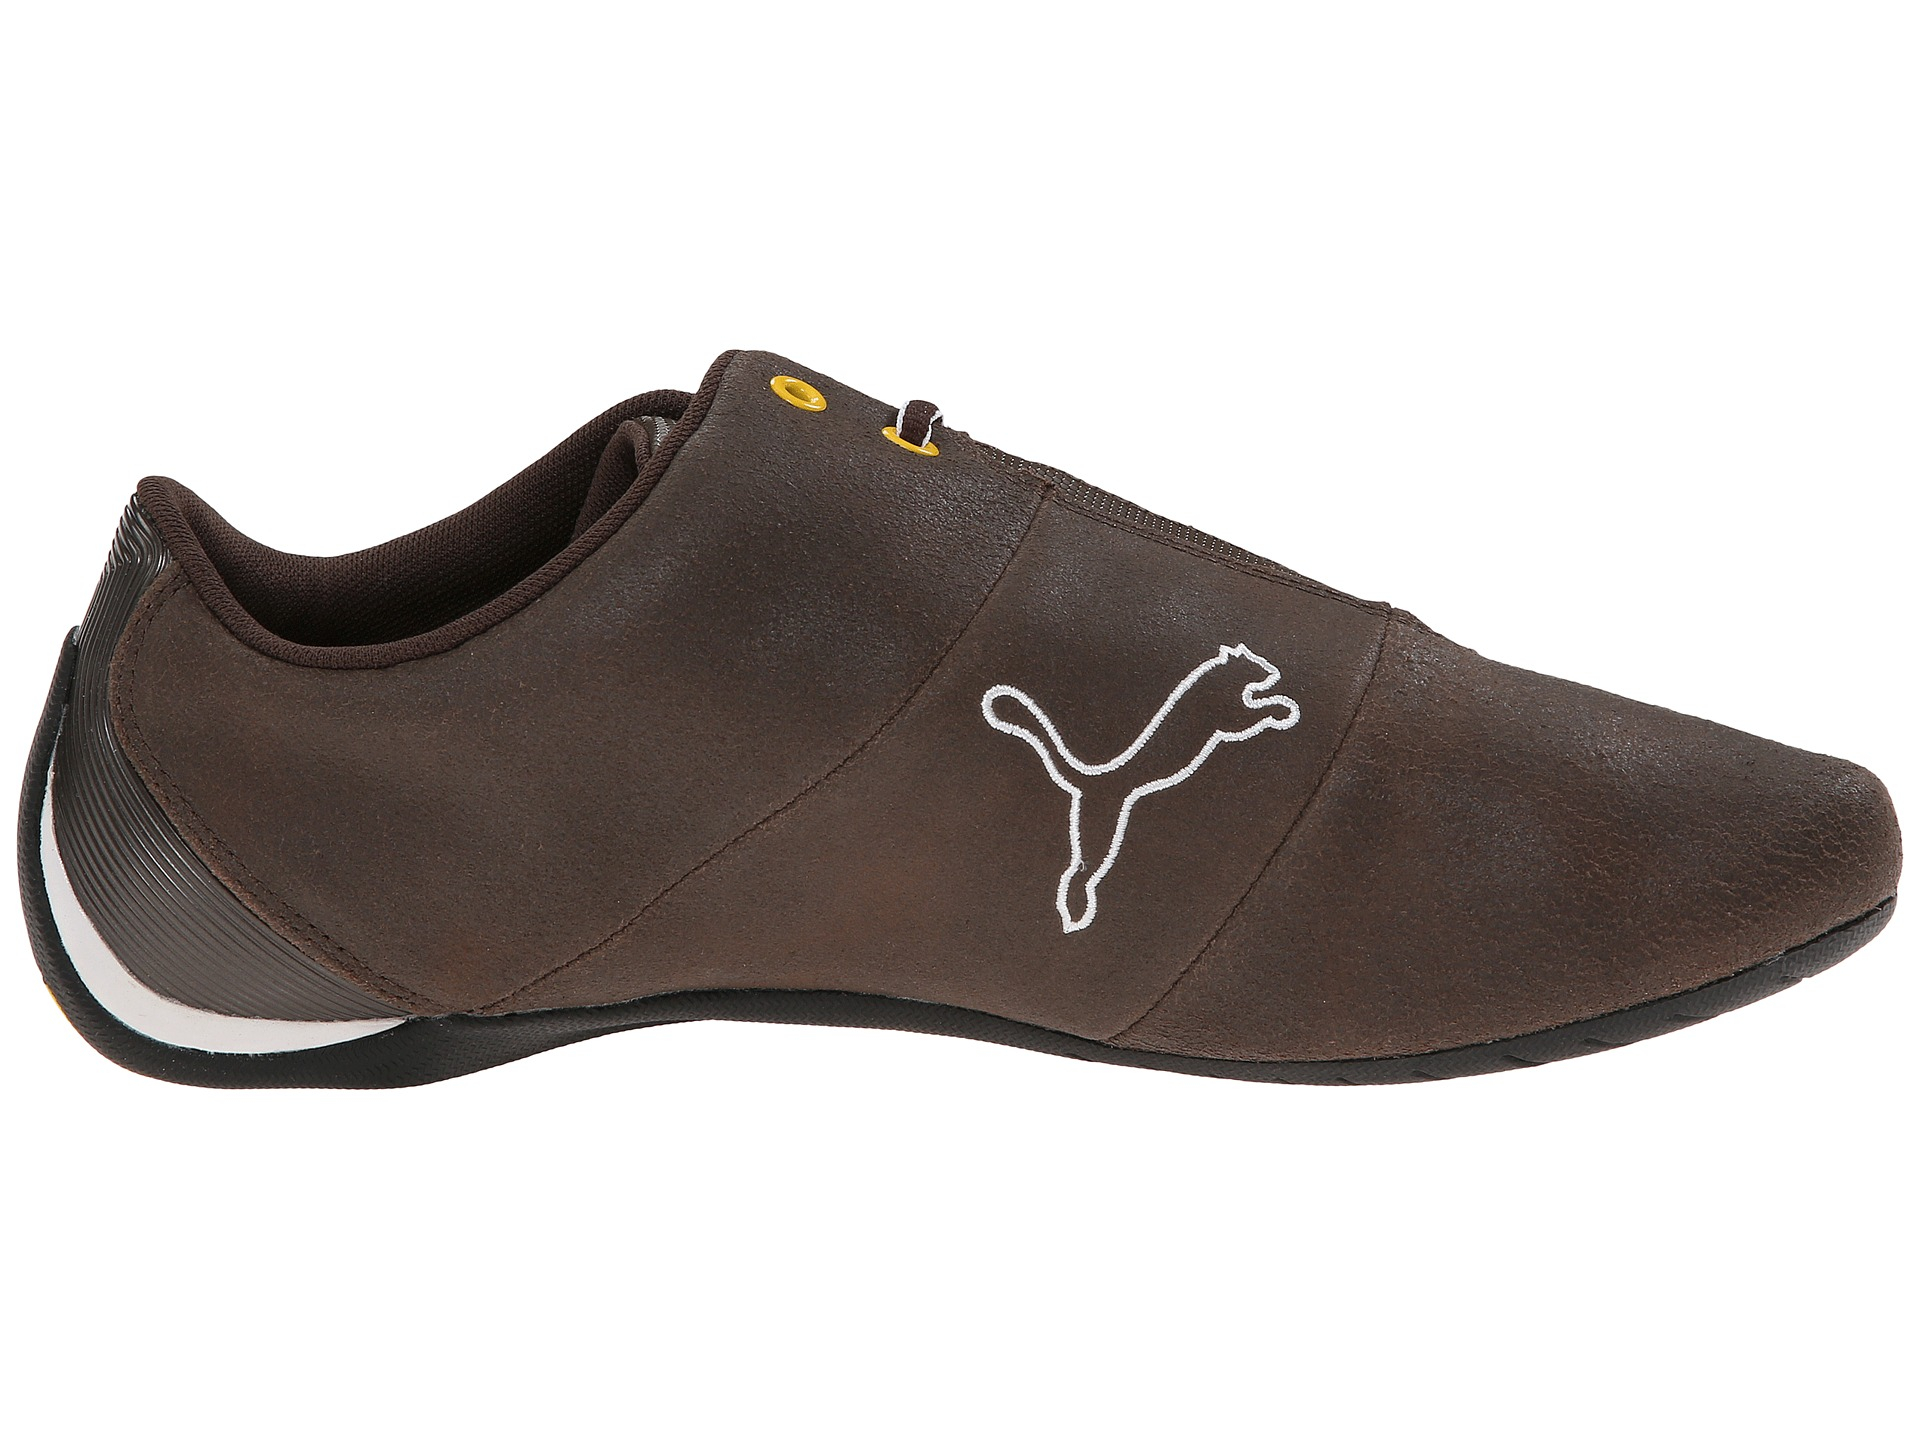 PUMA Future Cat S1 Leather in Chocolate Brown/Chocolate Brown/ (Brown ...